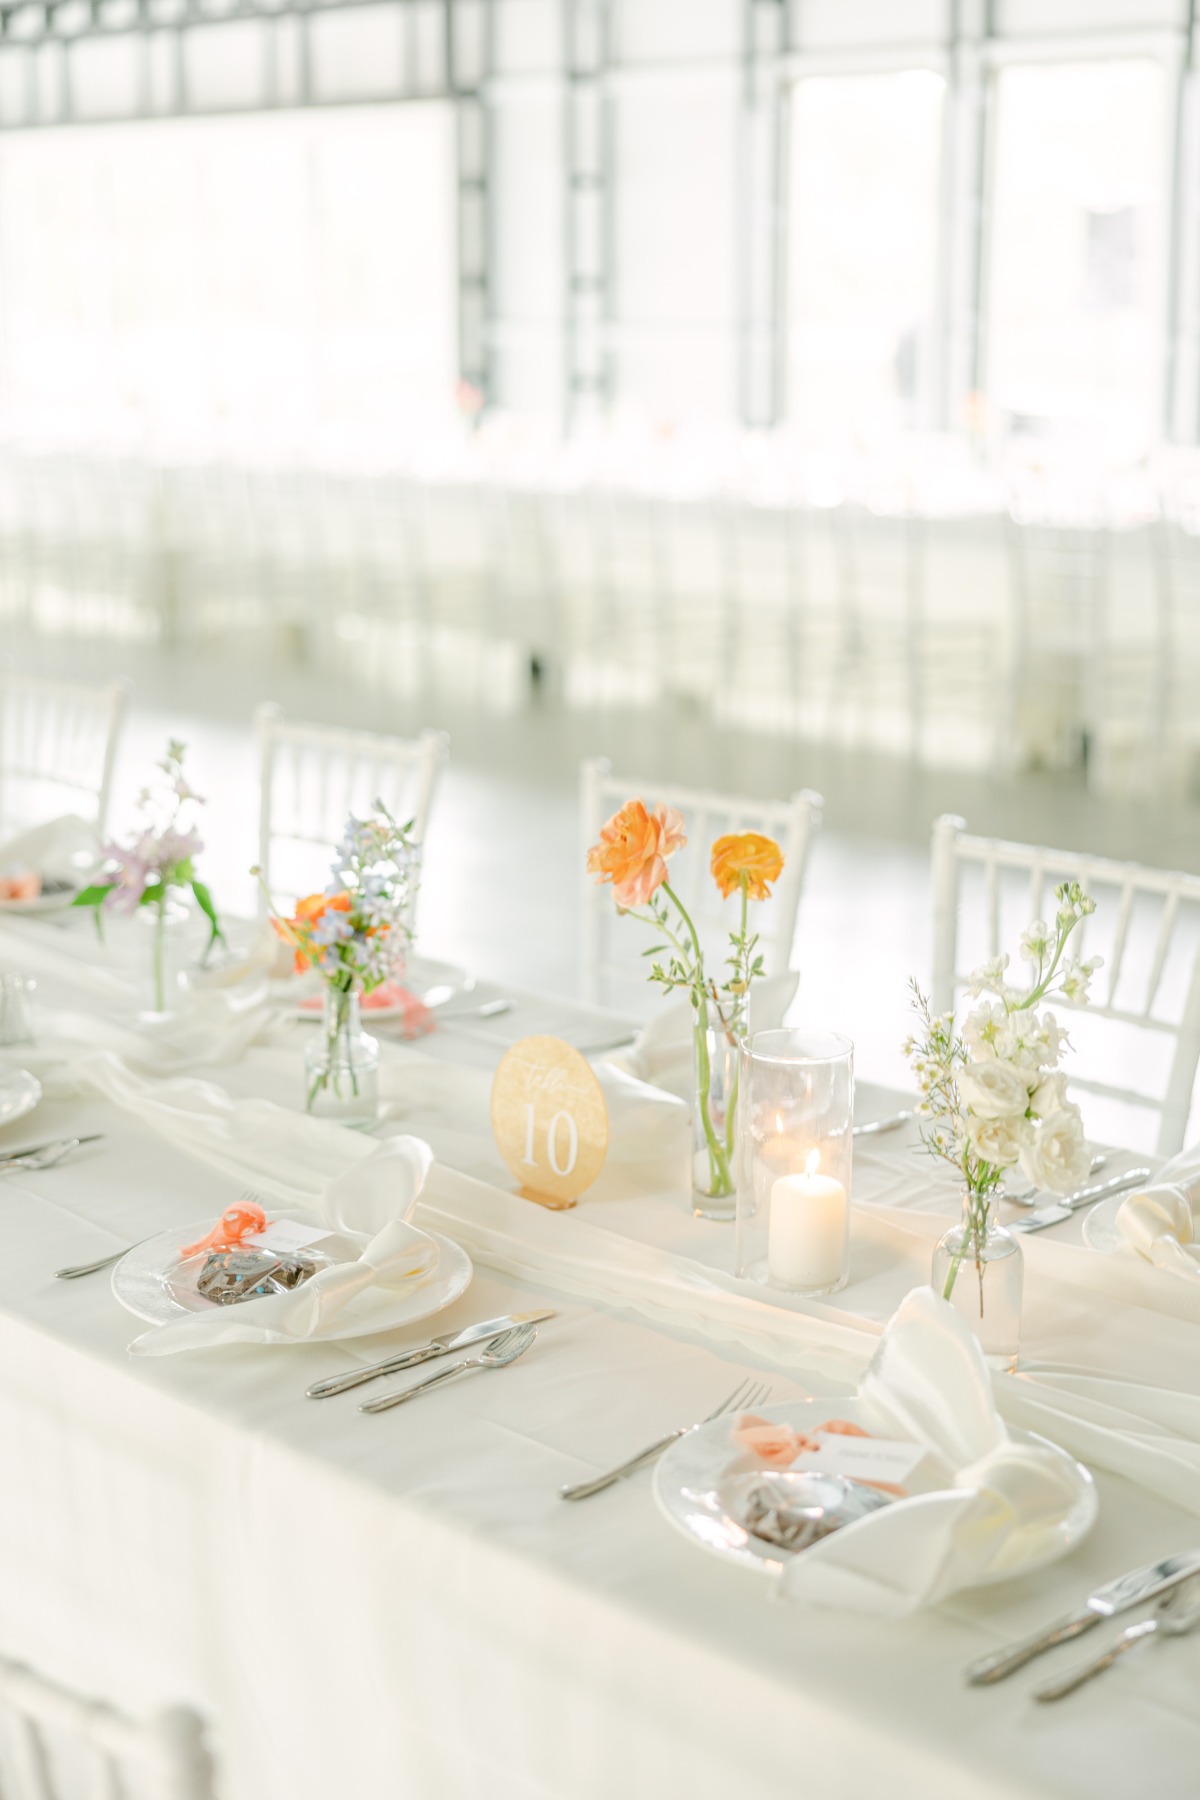 simple yet chic table decor